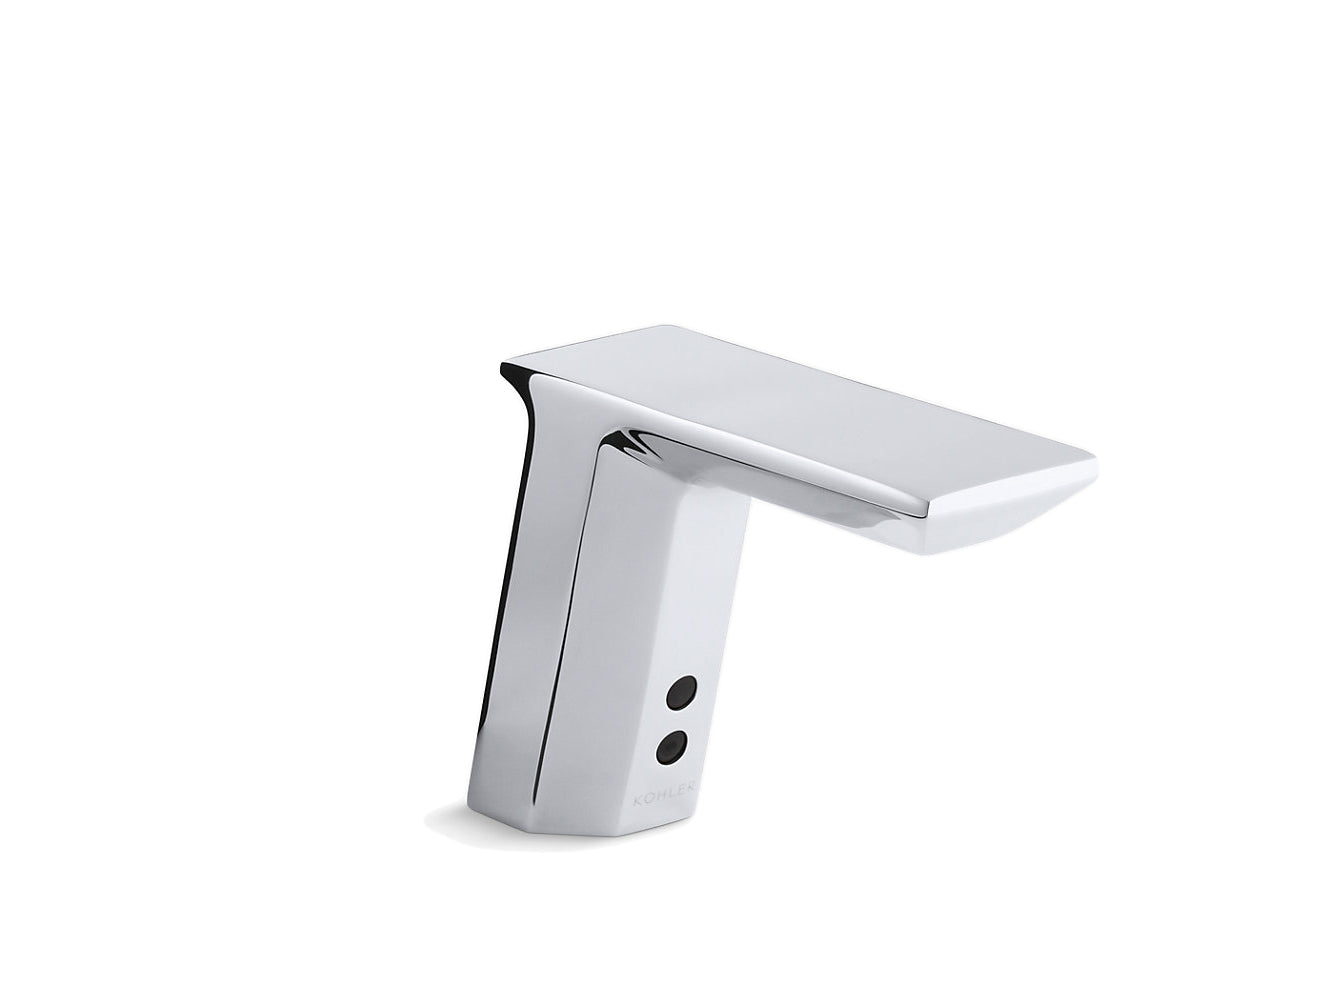 Kohler Geometric Touchless Faucet With Insight Technology DC Powered - Polished Chrome